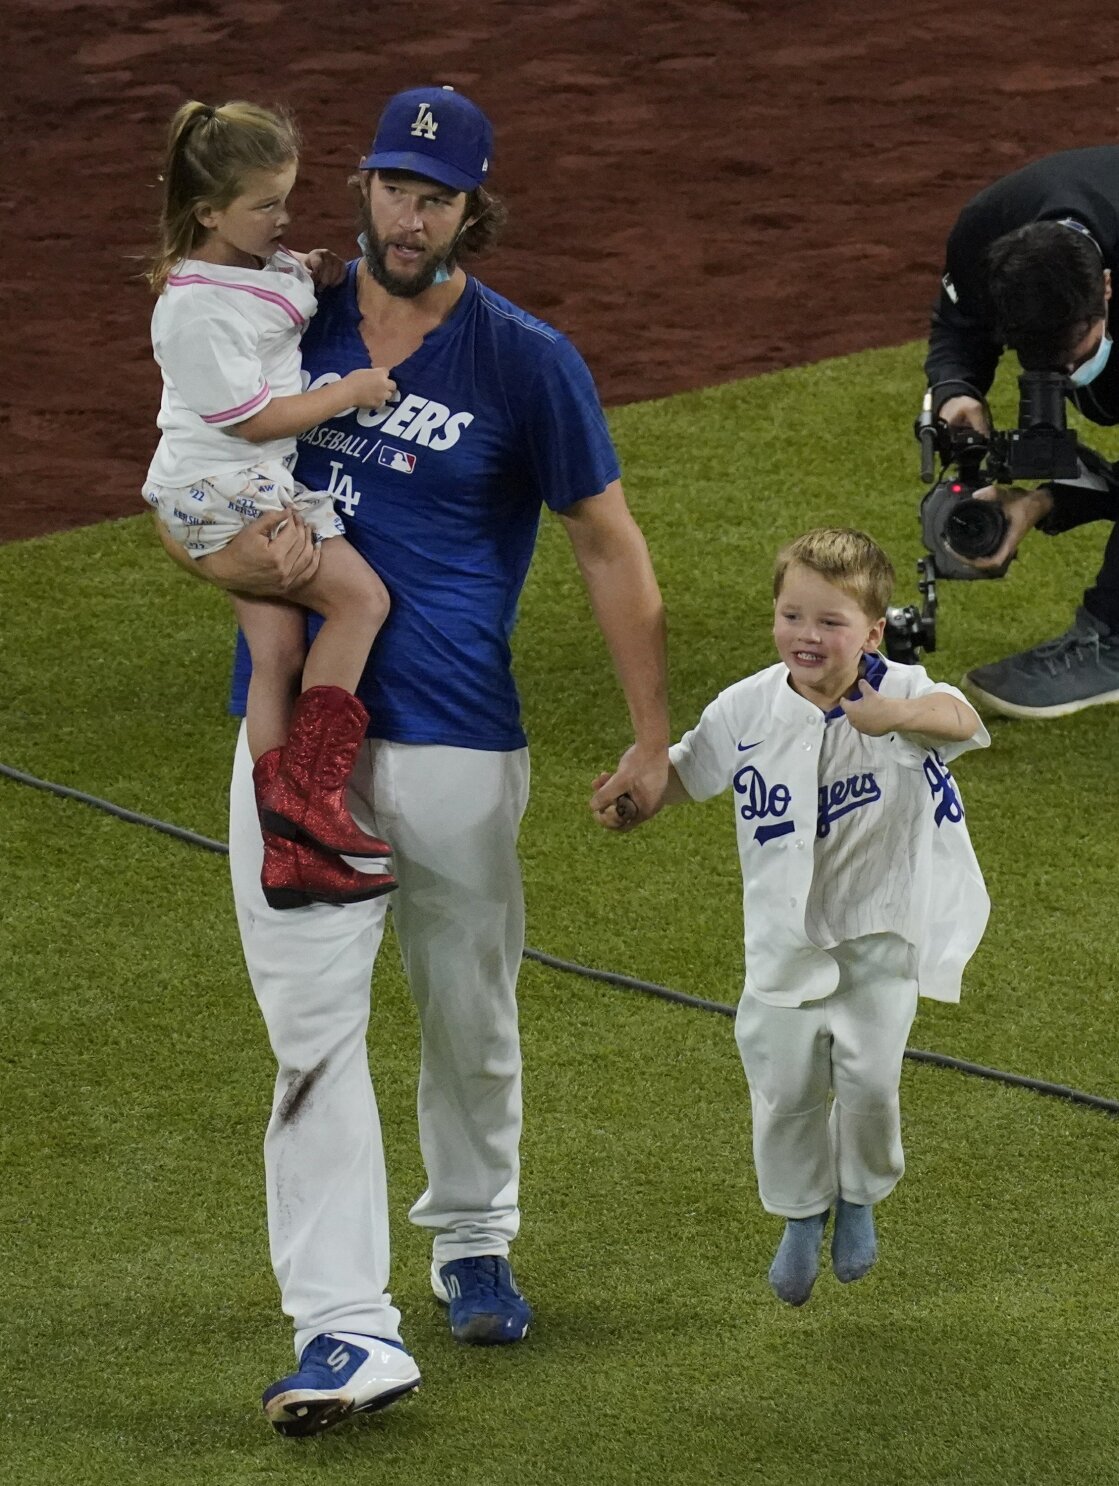 Dodgers ace Kershaw finally wins elusive World Series title